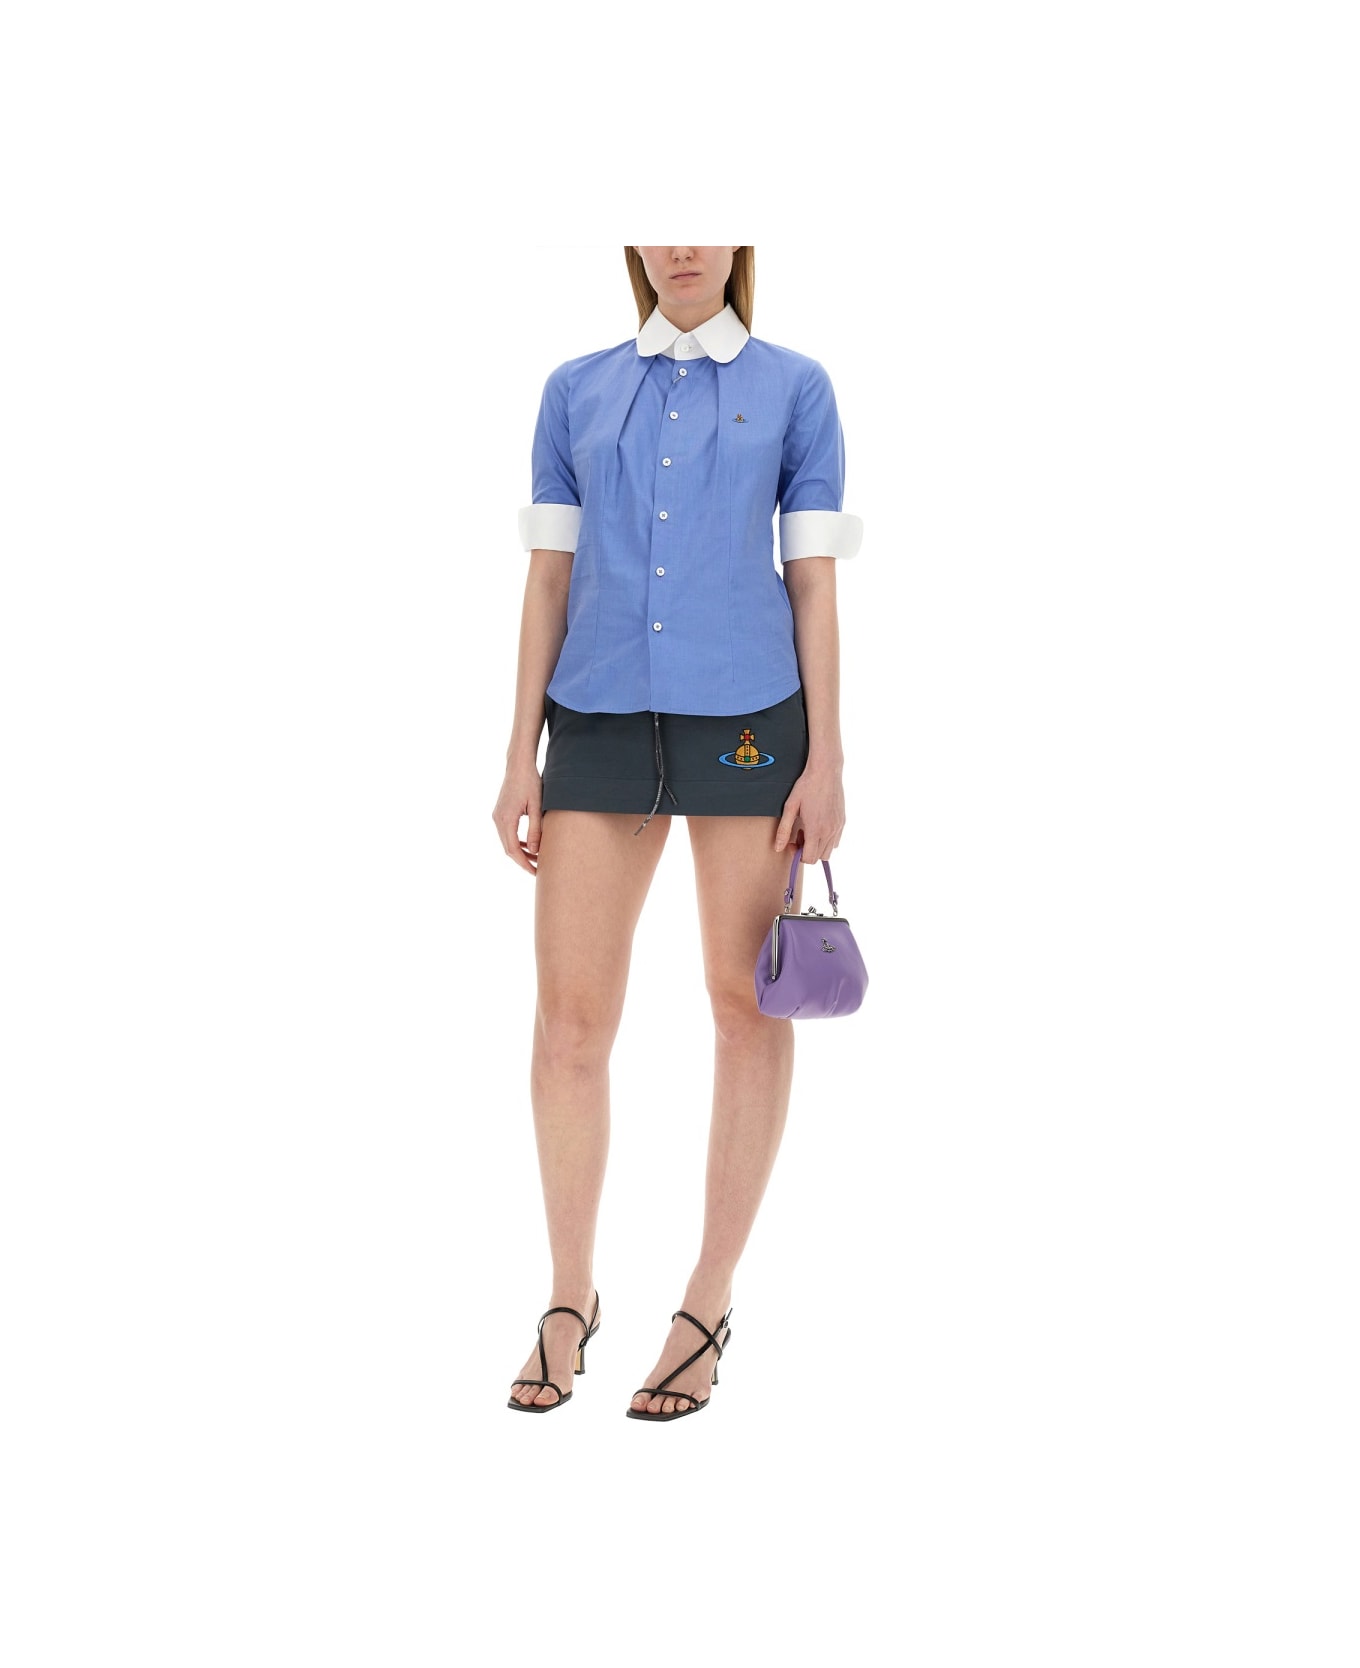 Vivienne Westwood Shirt With Orb Embroidery - AZURE